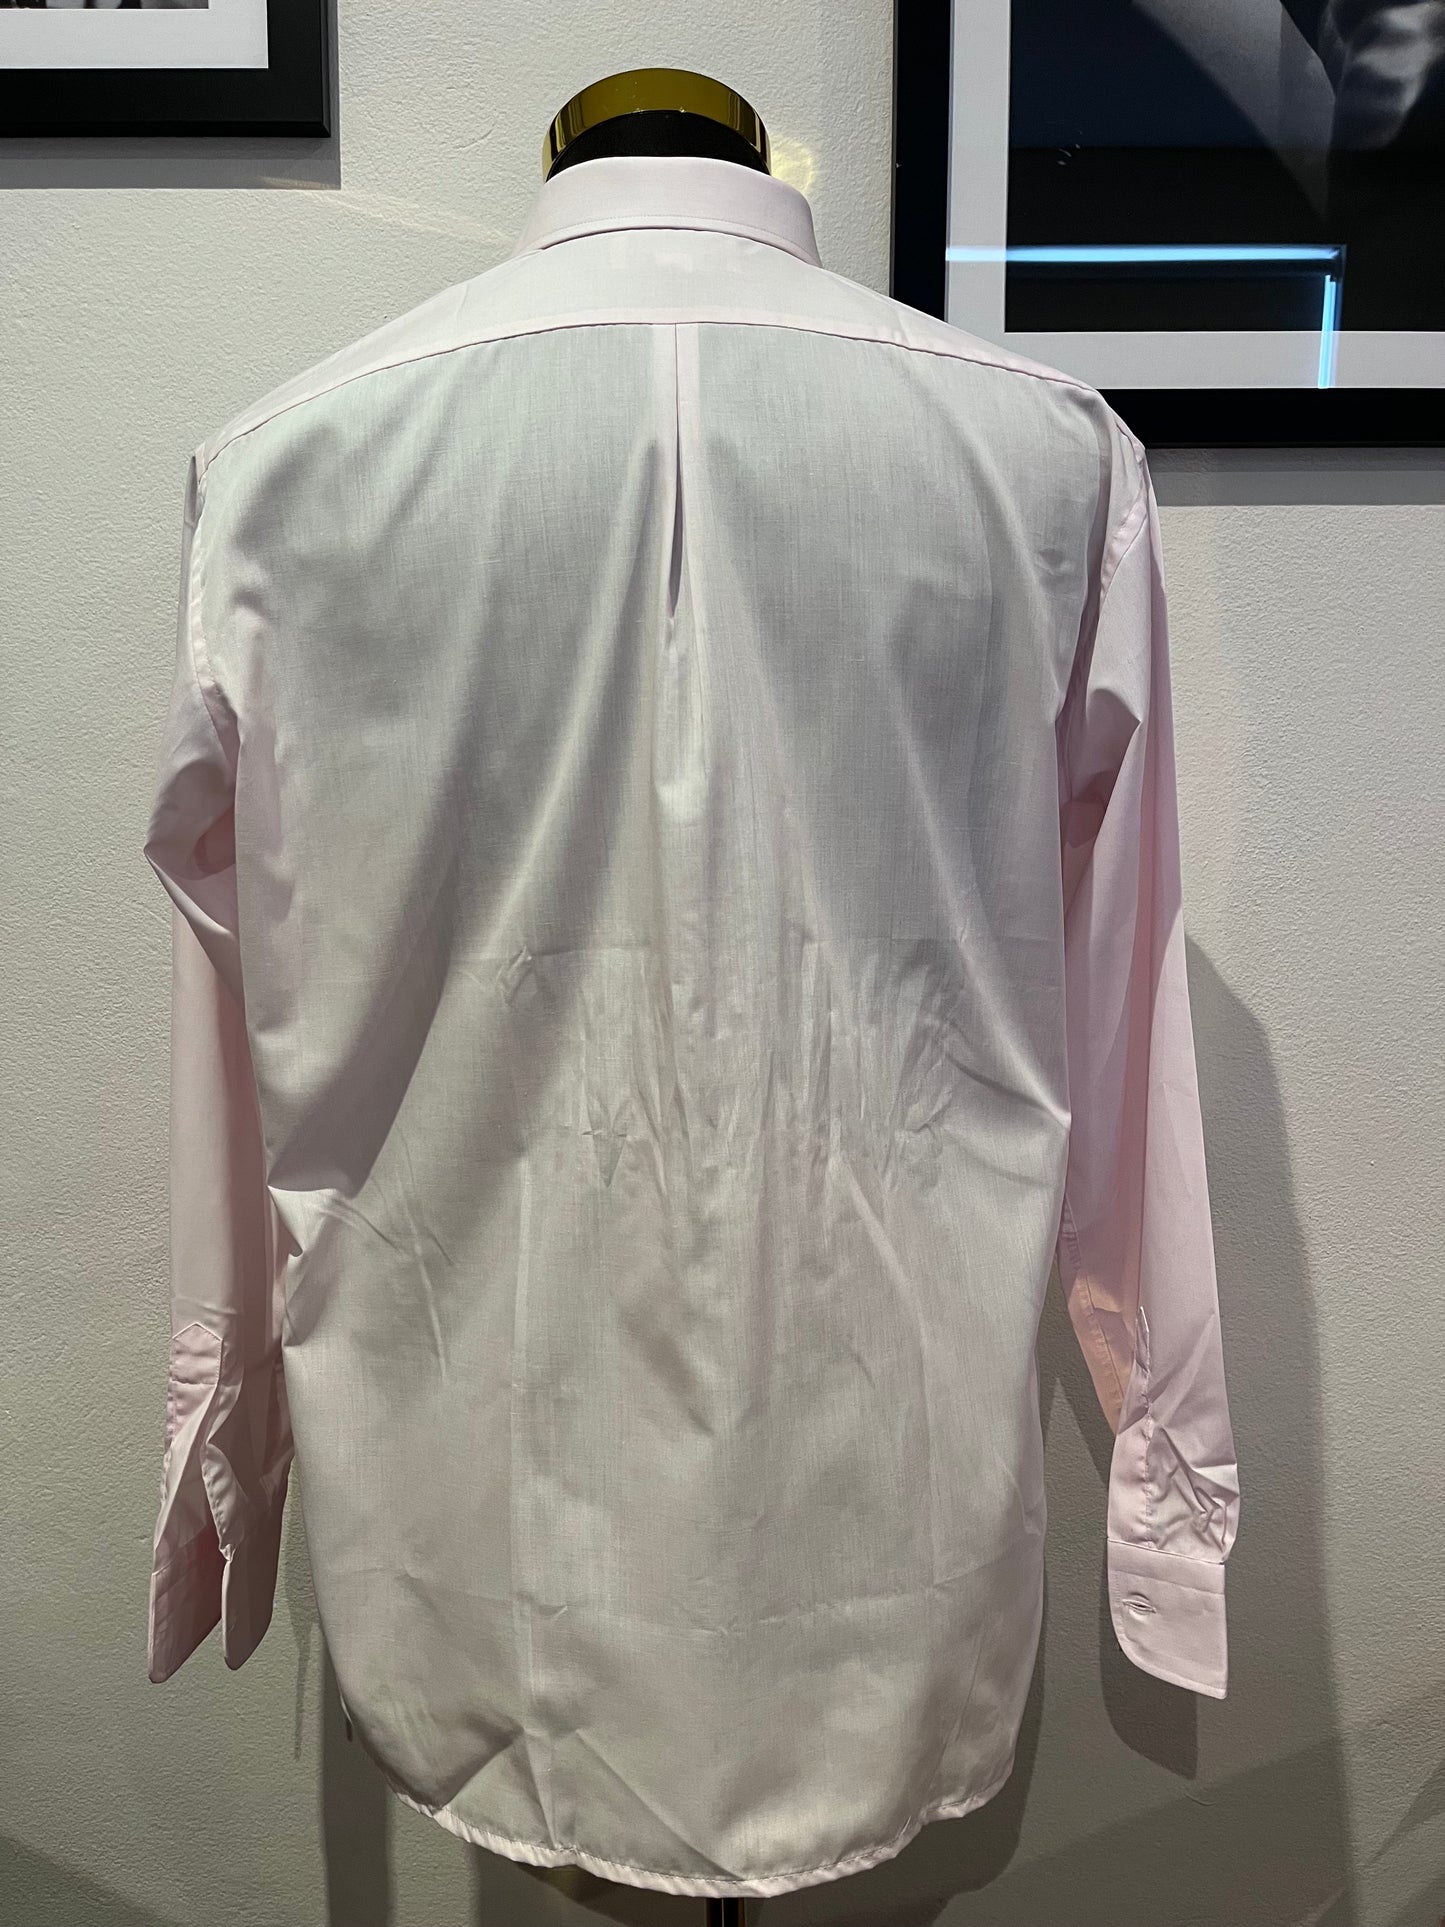 Christian Dior Dior Cotton Blend Pink Shirt Size Large 41 Made in Italy